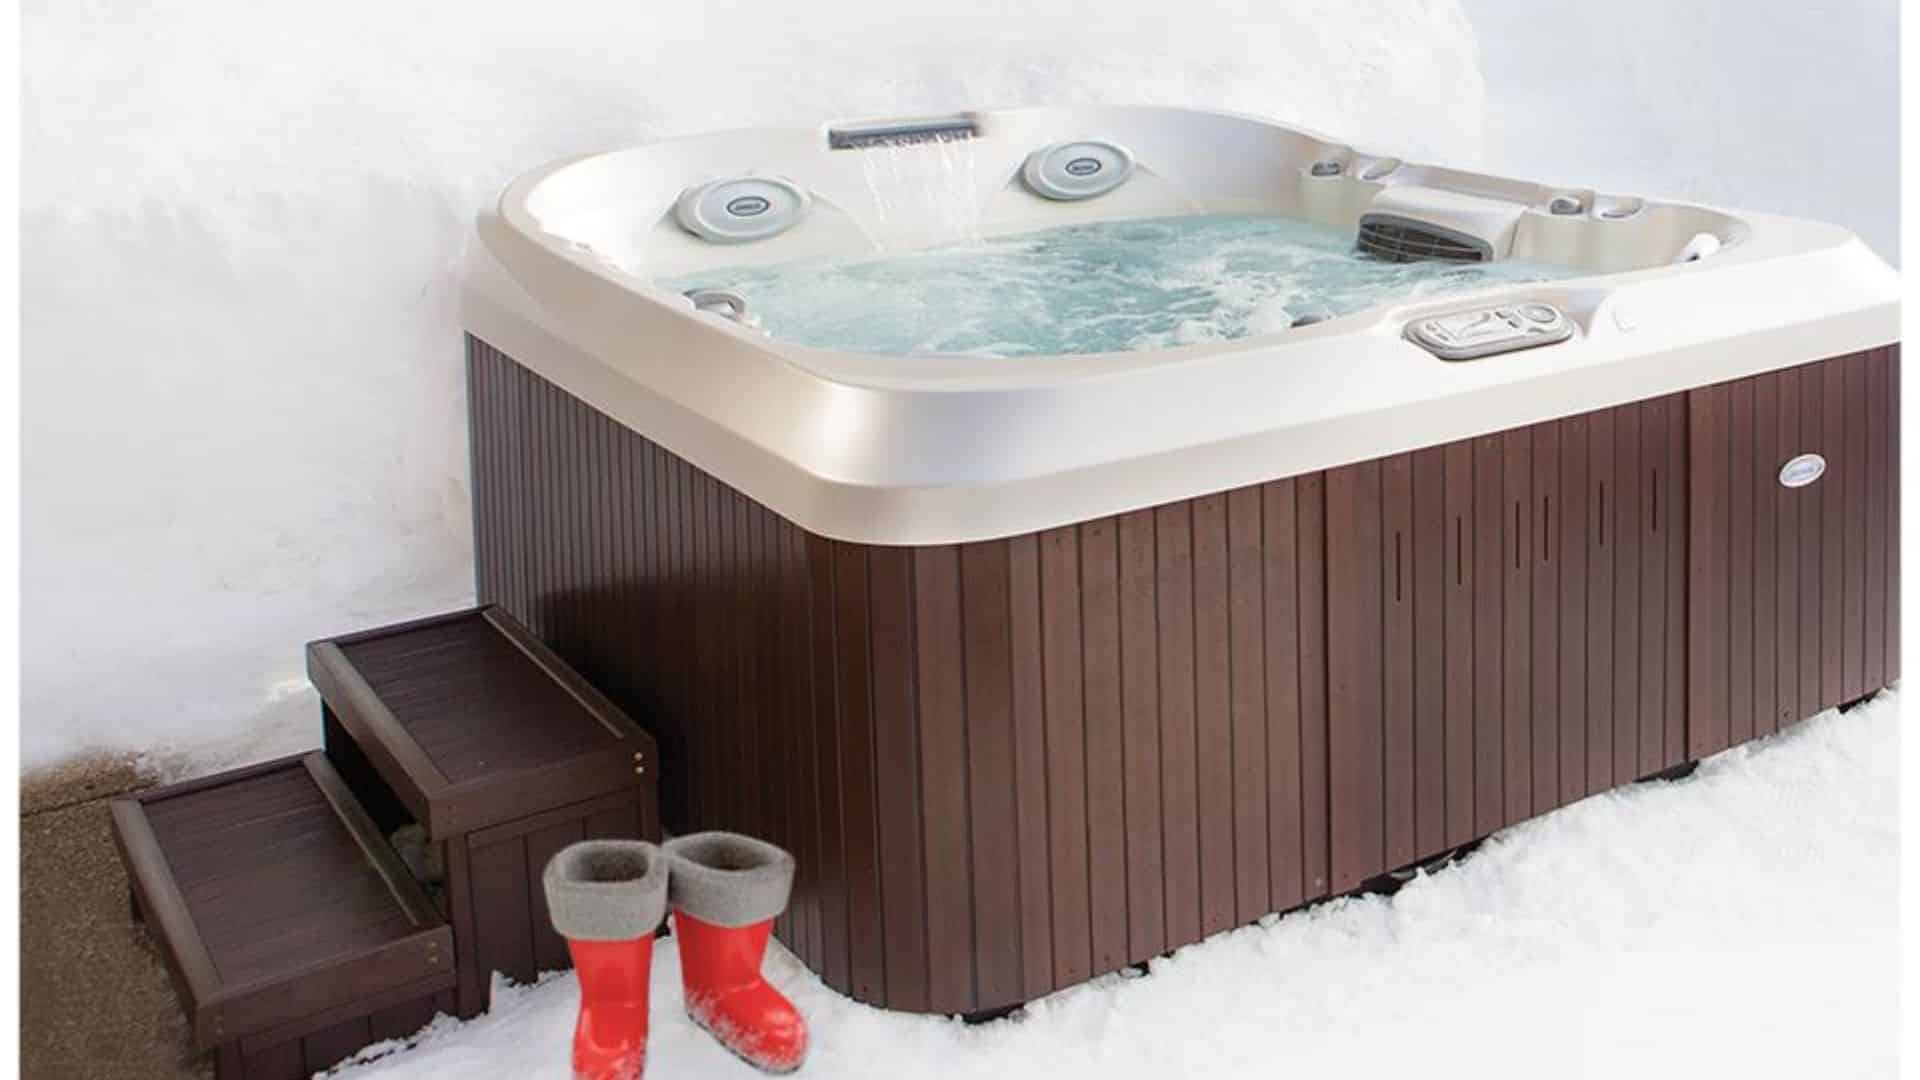 Hot Tub Care After Hosting a Holiday Party